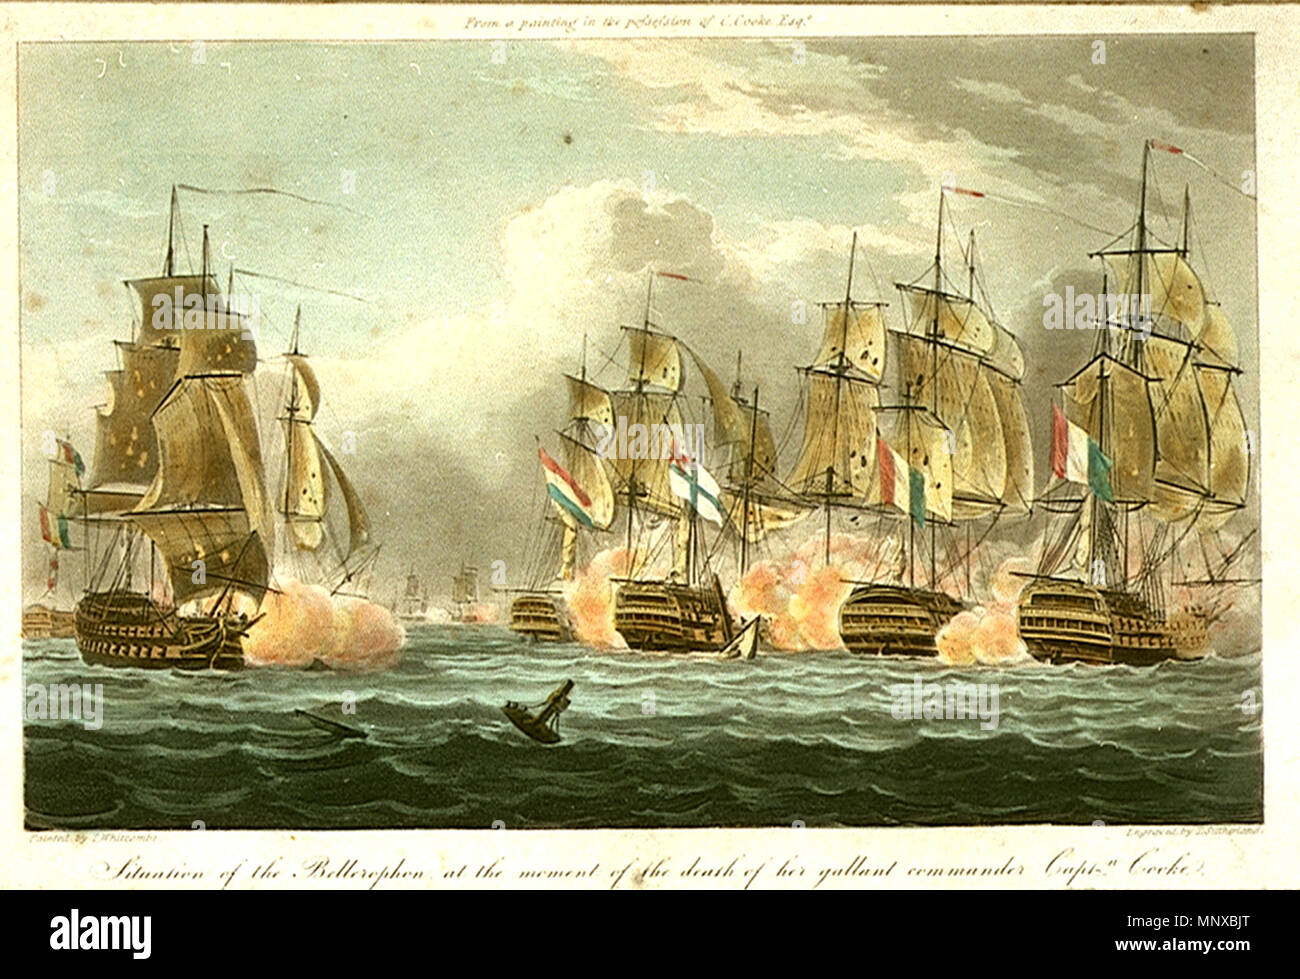 . English: HMS Bellerophon during the Battle of Trafalgar, on 21 October 1805. Whitcombe purports to show her at the moment when her captain, John Cooke, was killed, at roughly 1.11 pm. circa 1805.   Thomas Whitcombe  (1763–1824)    Description British painter  Date of birth/death circa 19 May 1763 circa 1824  Location of birth/death London unknown  Work location Bristol, Wales, Devon, Plymouth, etc.  Authority control  : Q2676635 VIAF: 94399385 ULAN: 500004894 LCCN: no2009013481 NLA: 36161020 WGA: WHITCOMBE, Thomas WorldCat 1126 Situation of the Bellerophon at the moment of the death of her g Stock Photo